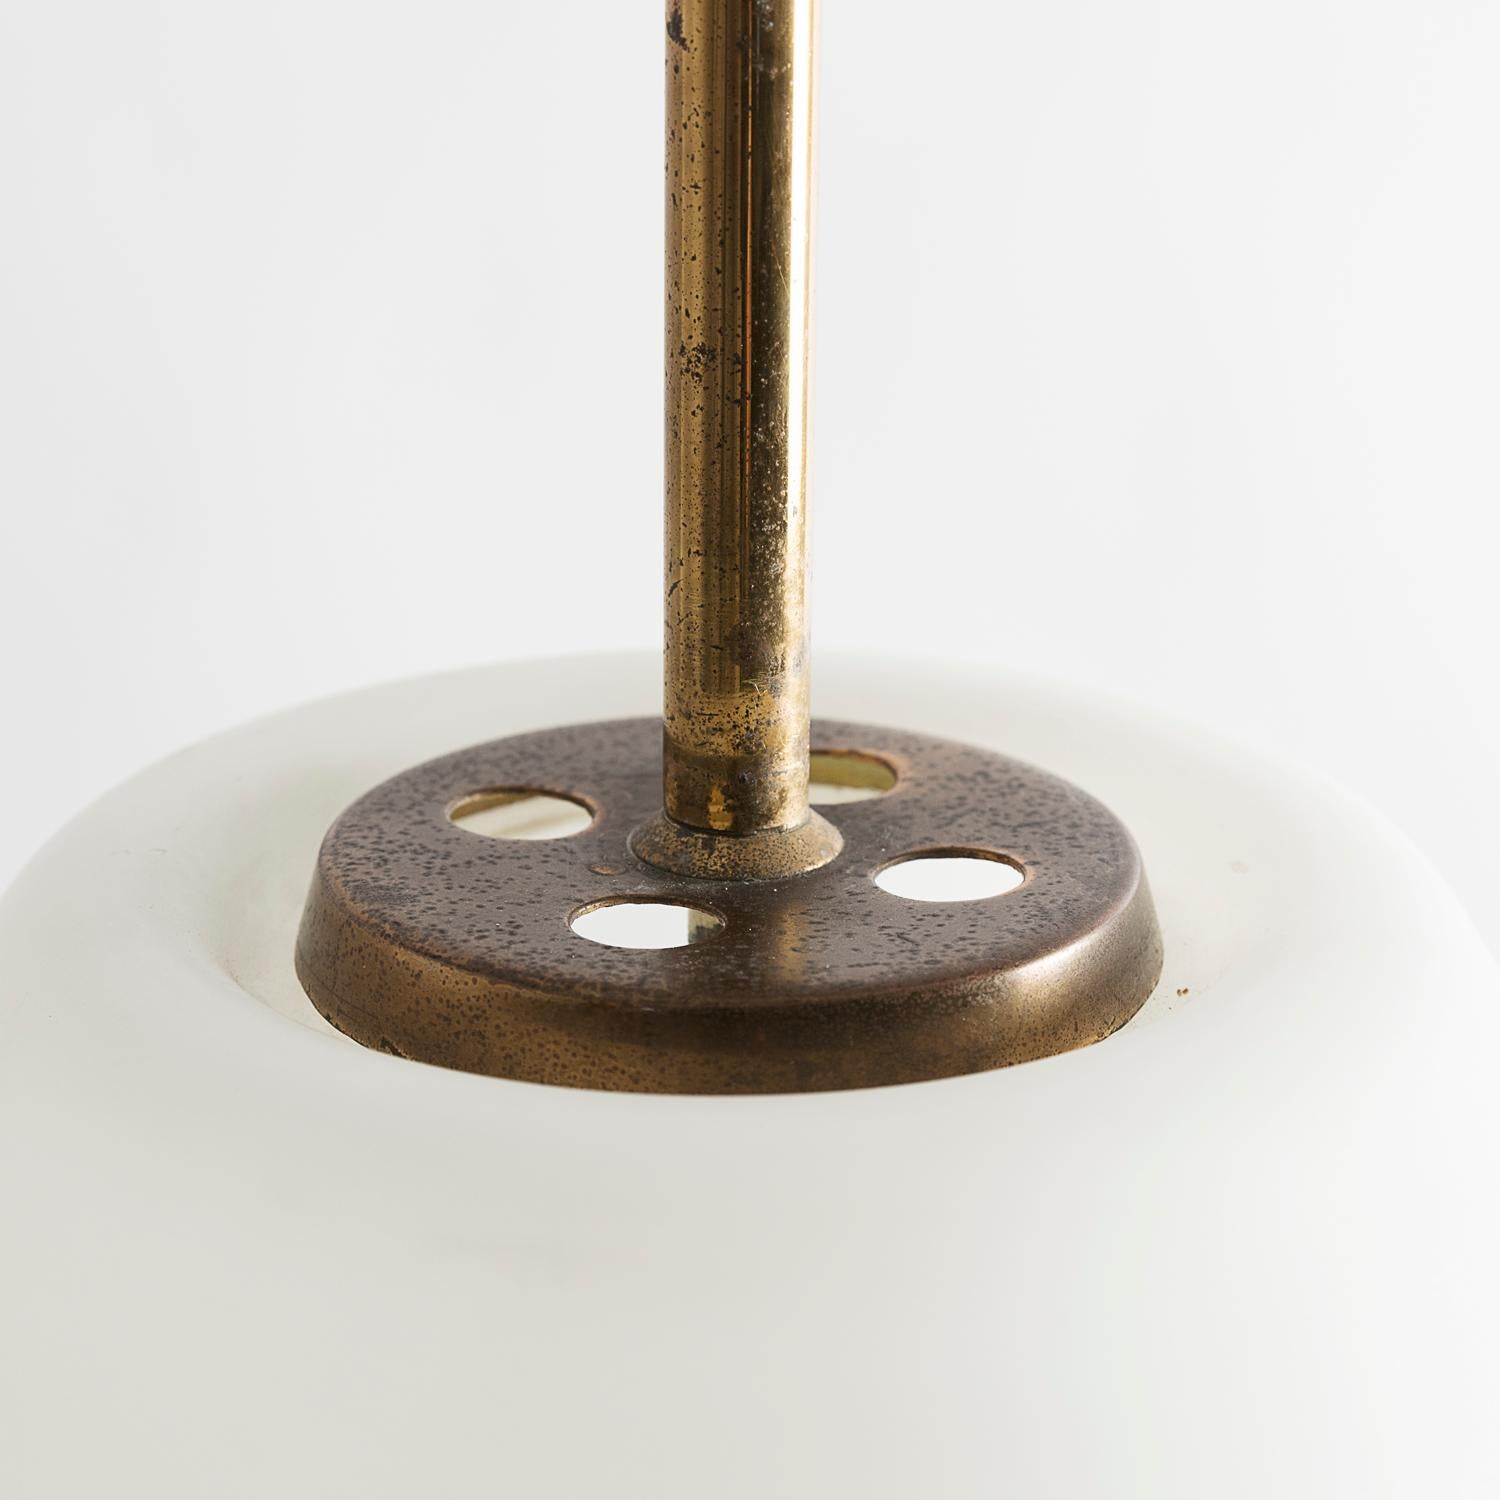 Mid-20th Century Stilnovo Glass and Brass Large Table Lamp from the 1950s